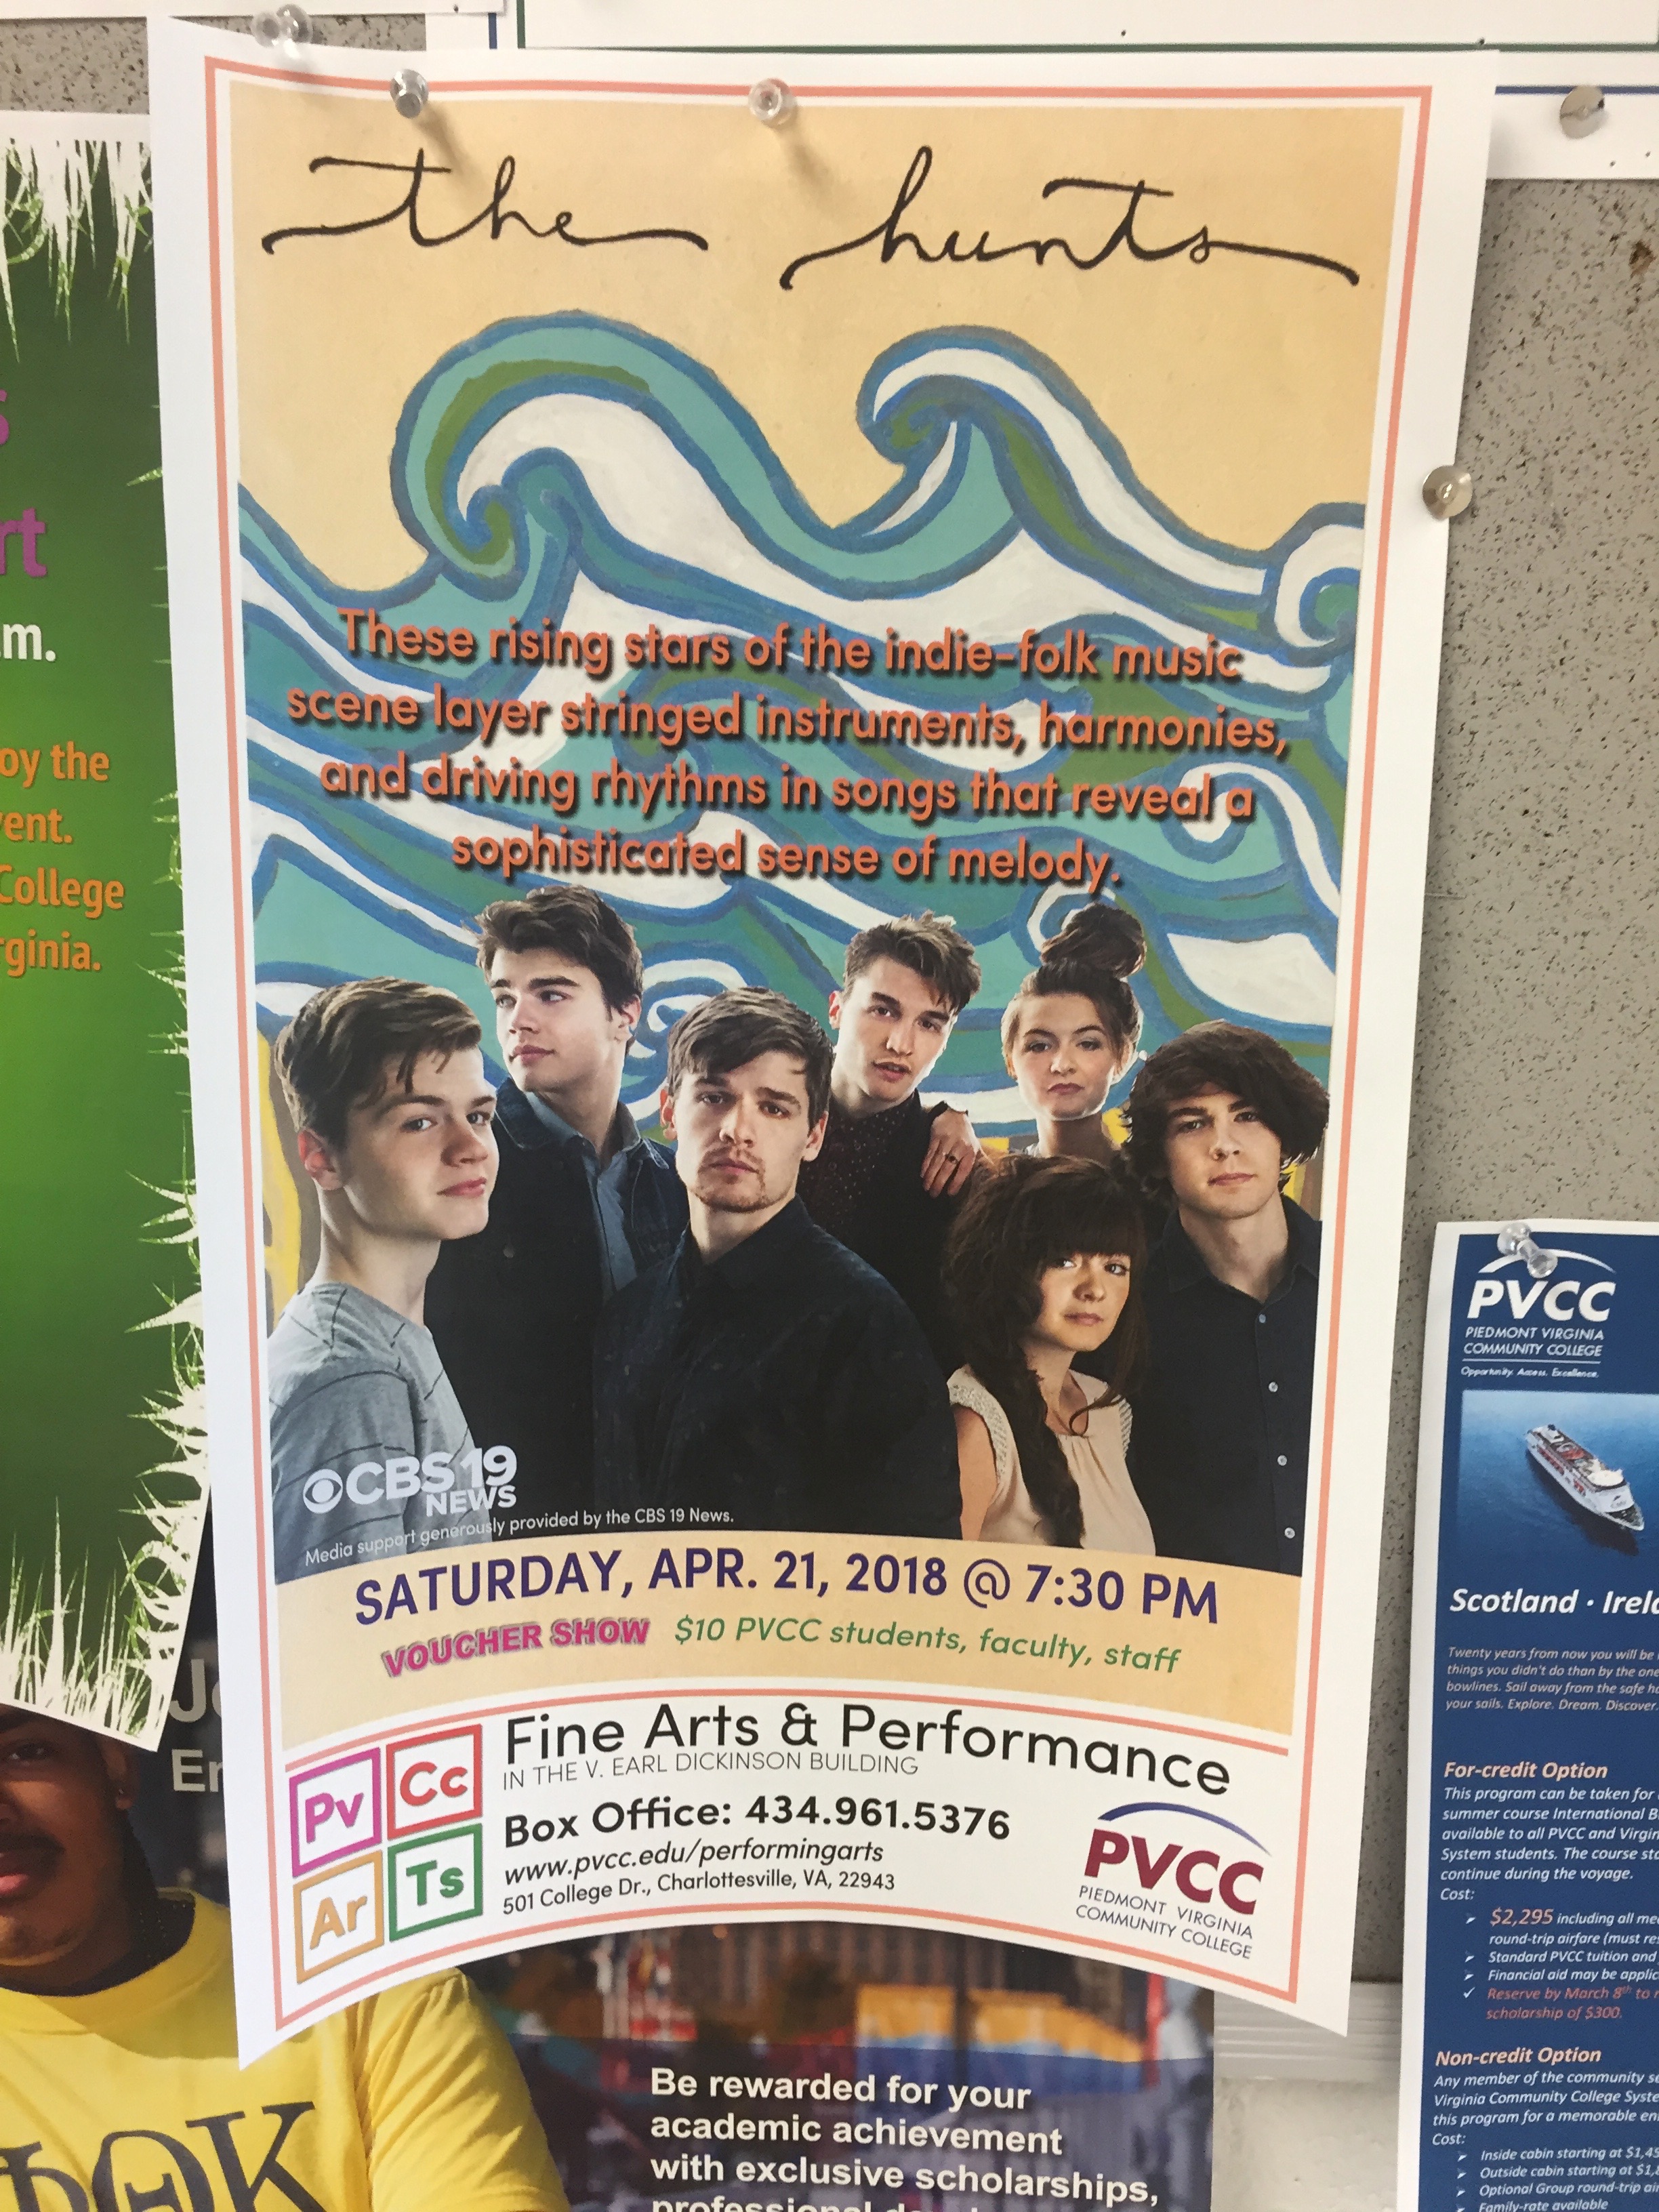 A poster for the Hunts concert at PVCC